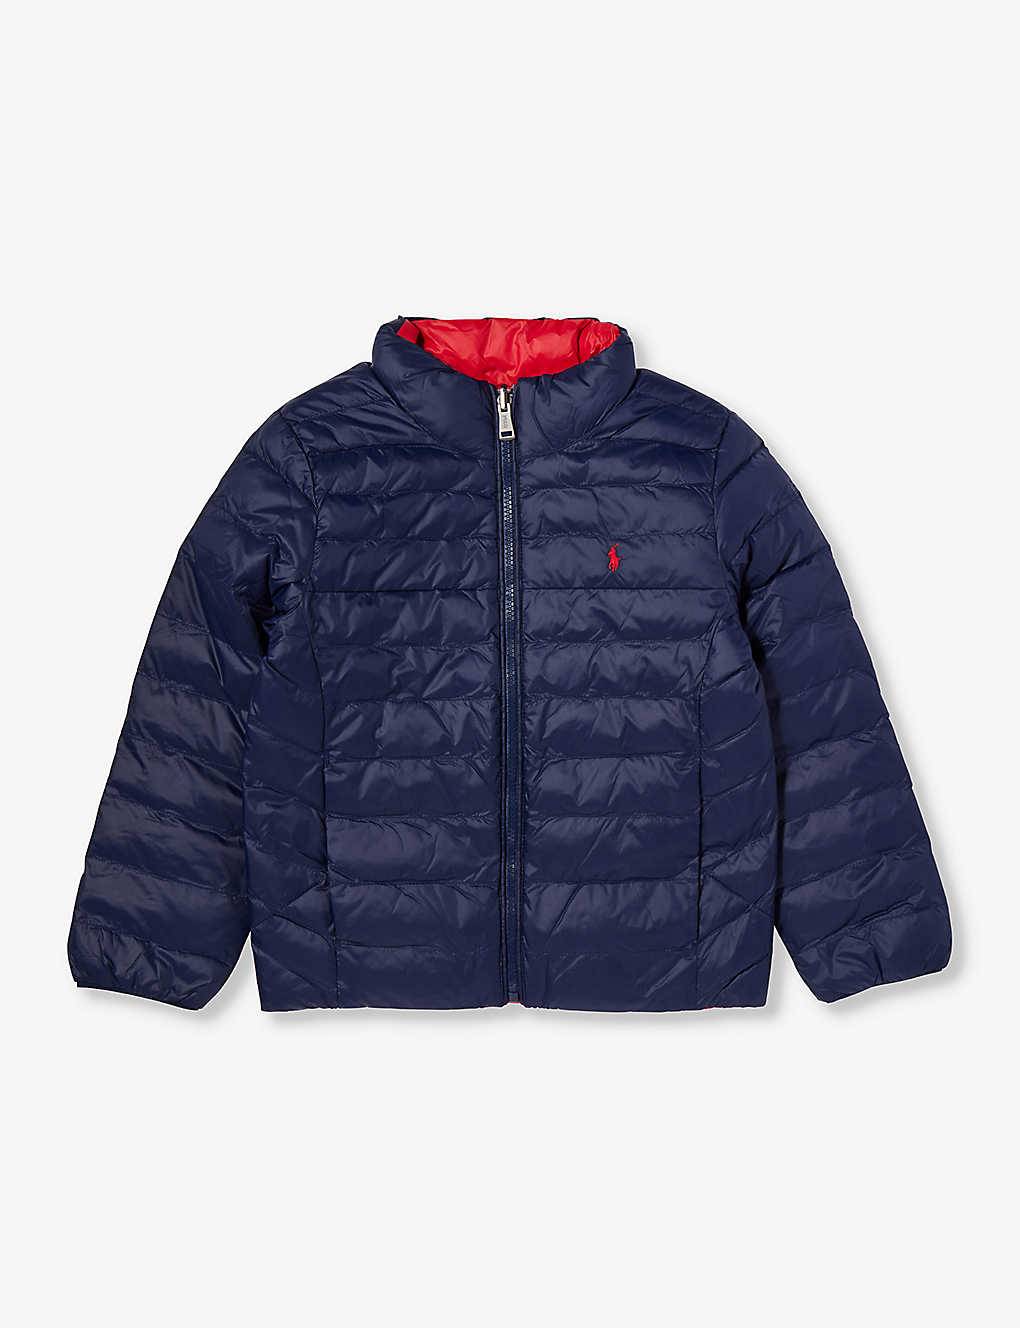 Polo Ralph Lauren Boys Navy Kids Terra Brand-embroidered Recycled-nylon Jacket 4-14 Years